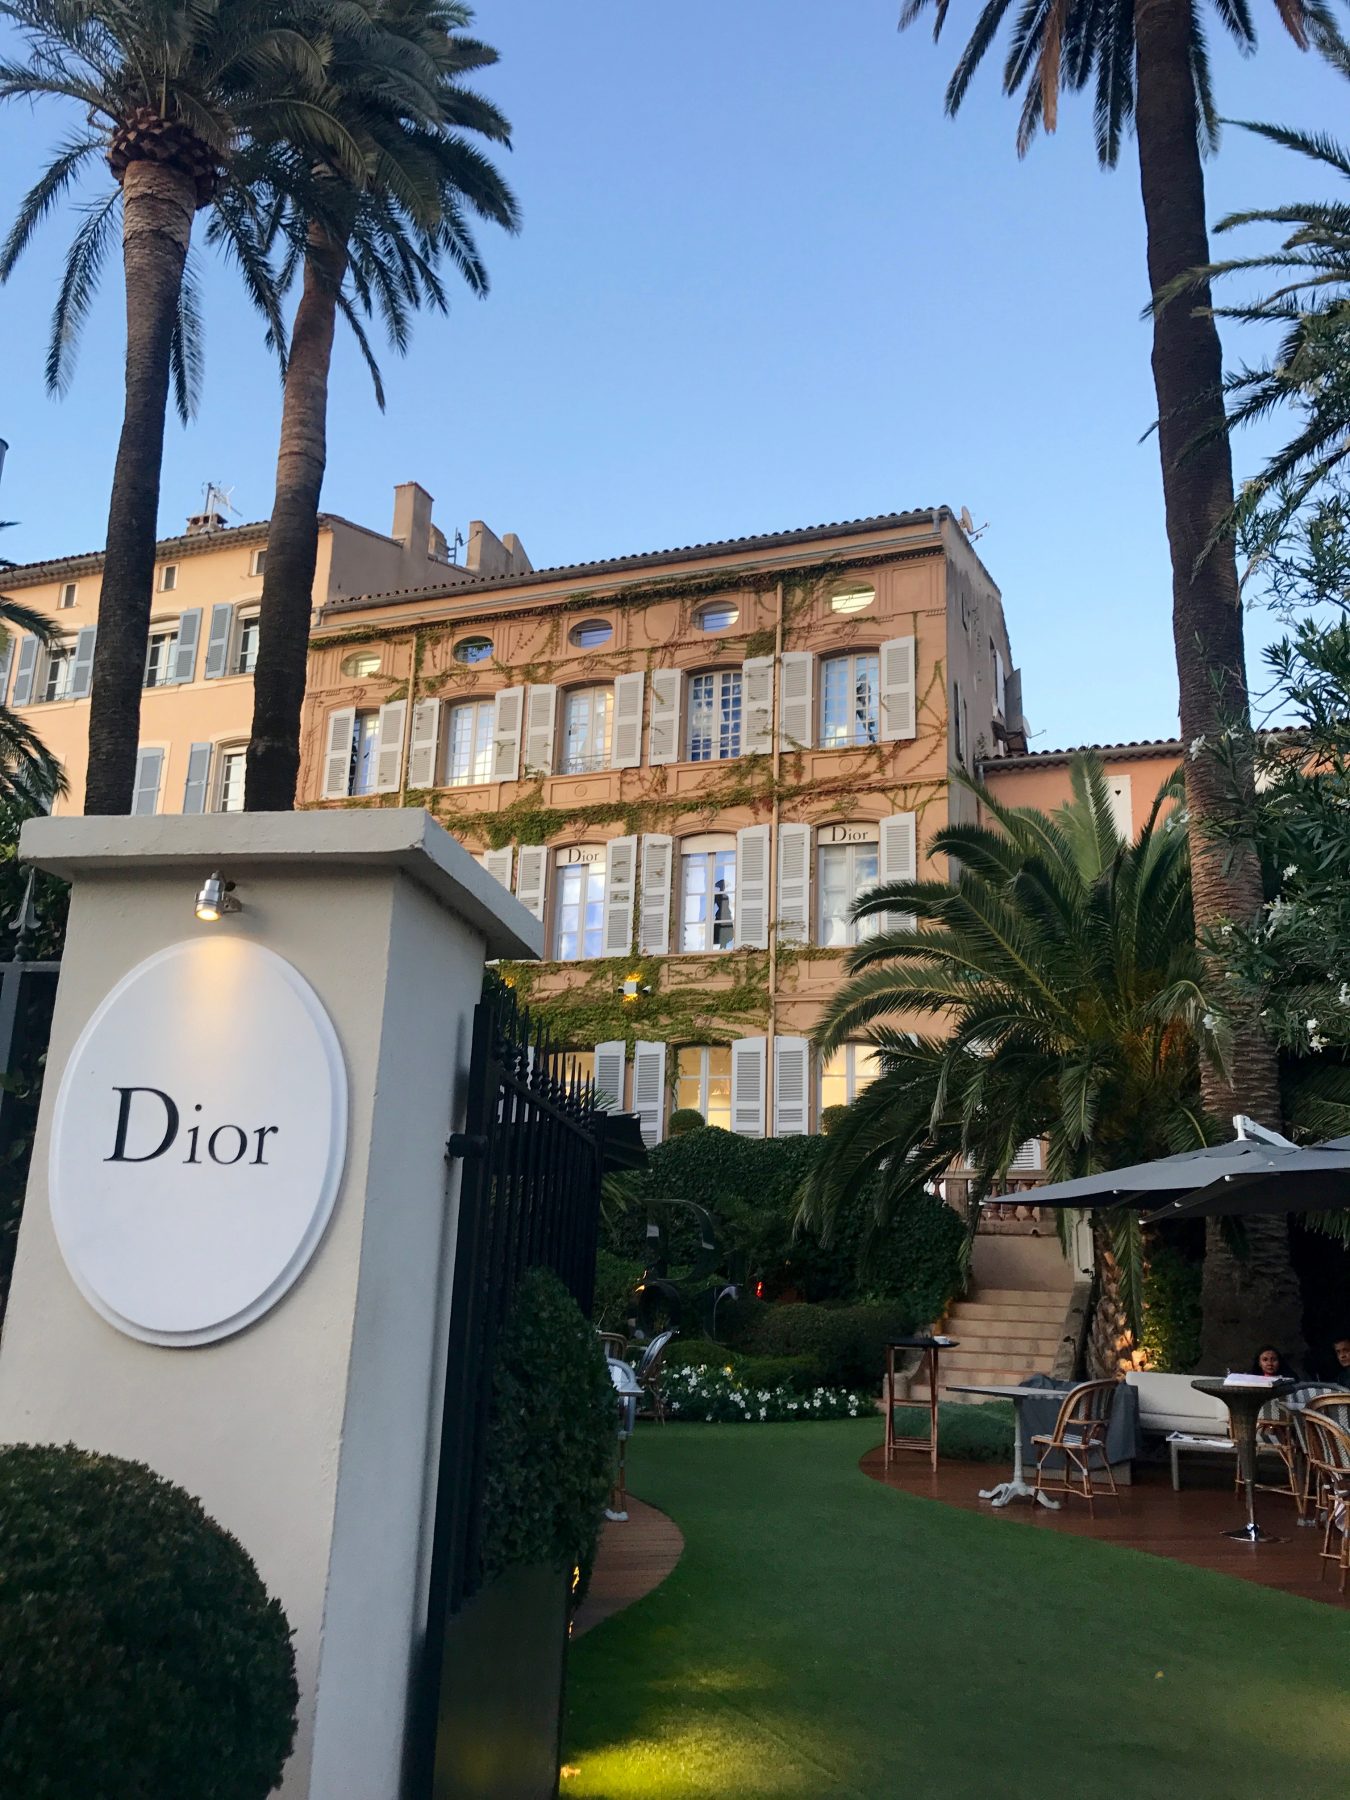 St Tropez highlights - Healthy Luxe